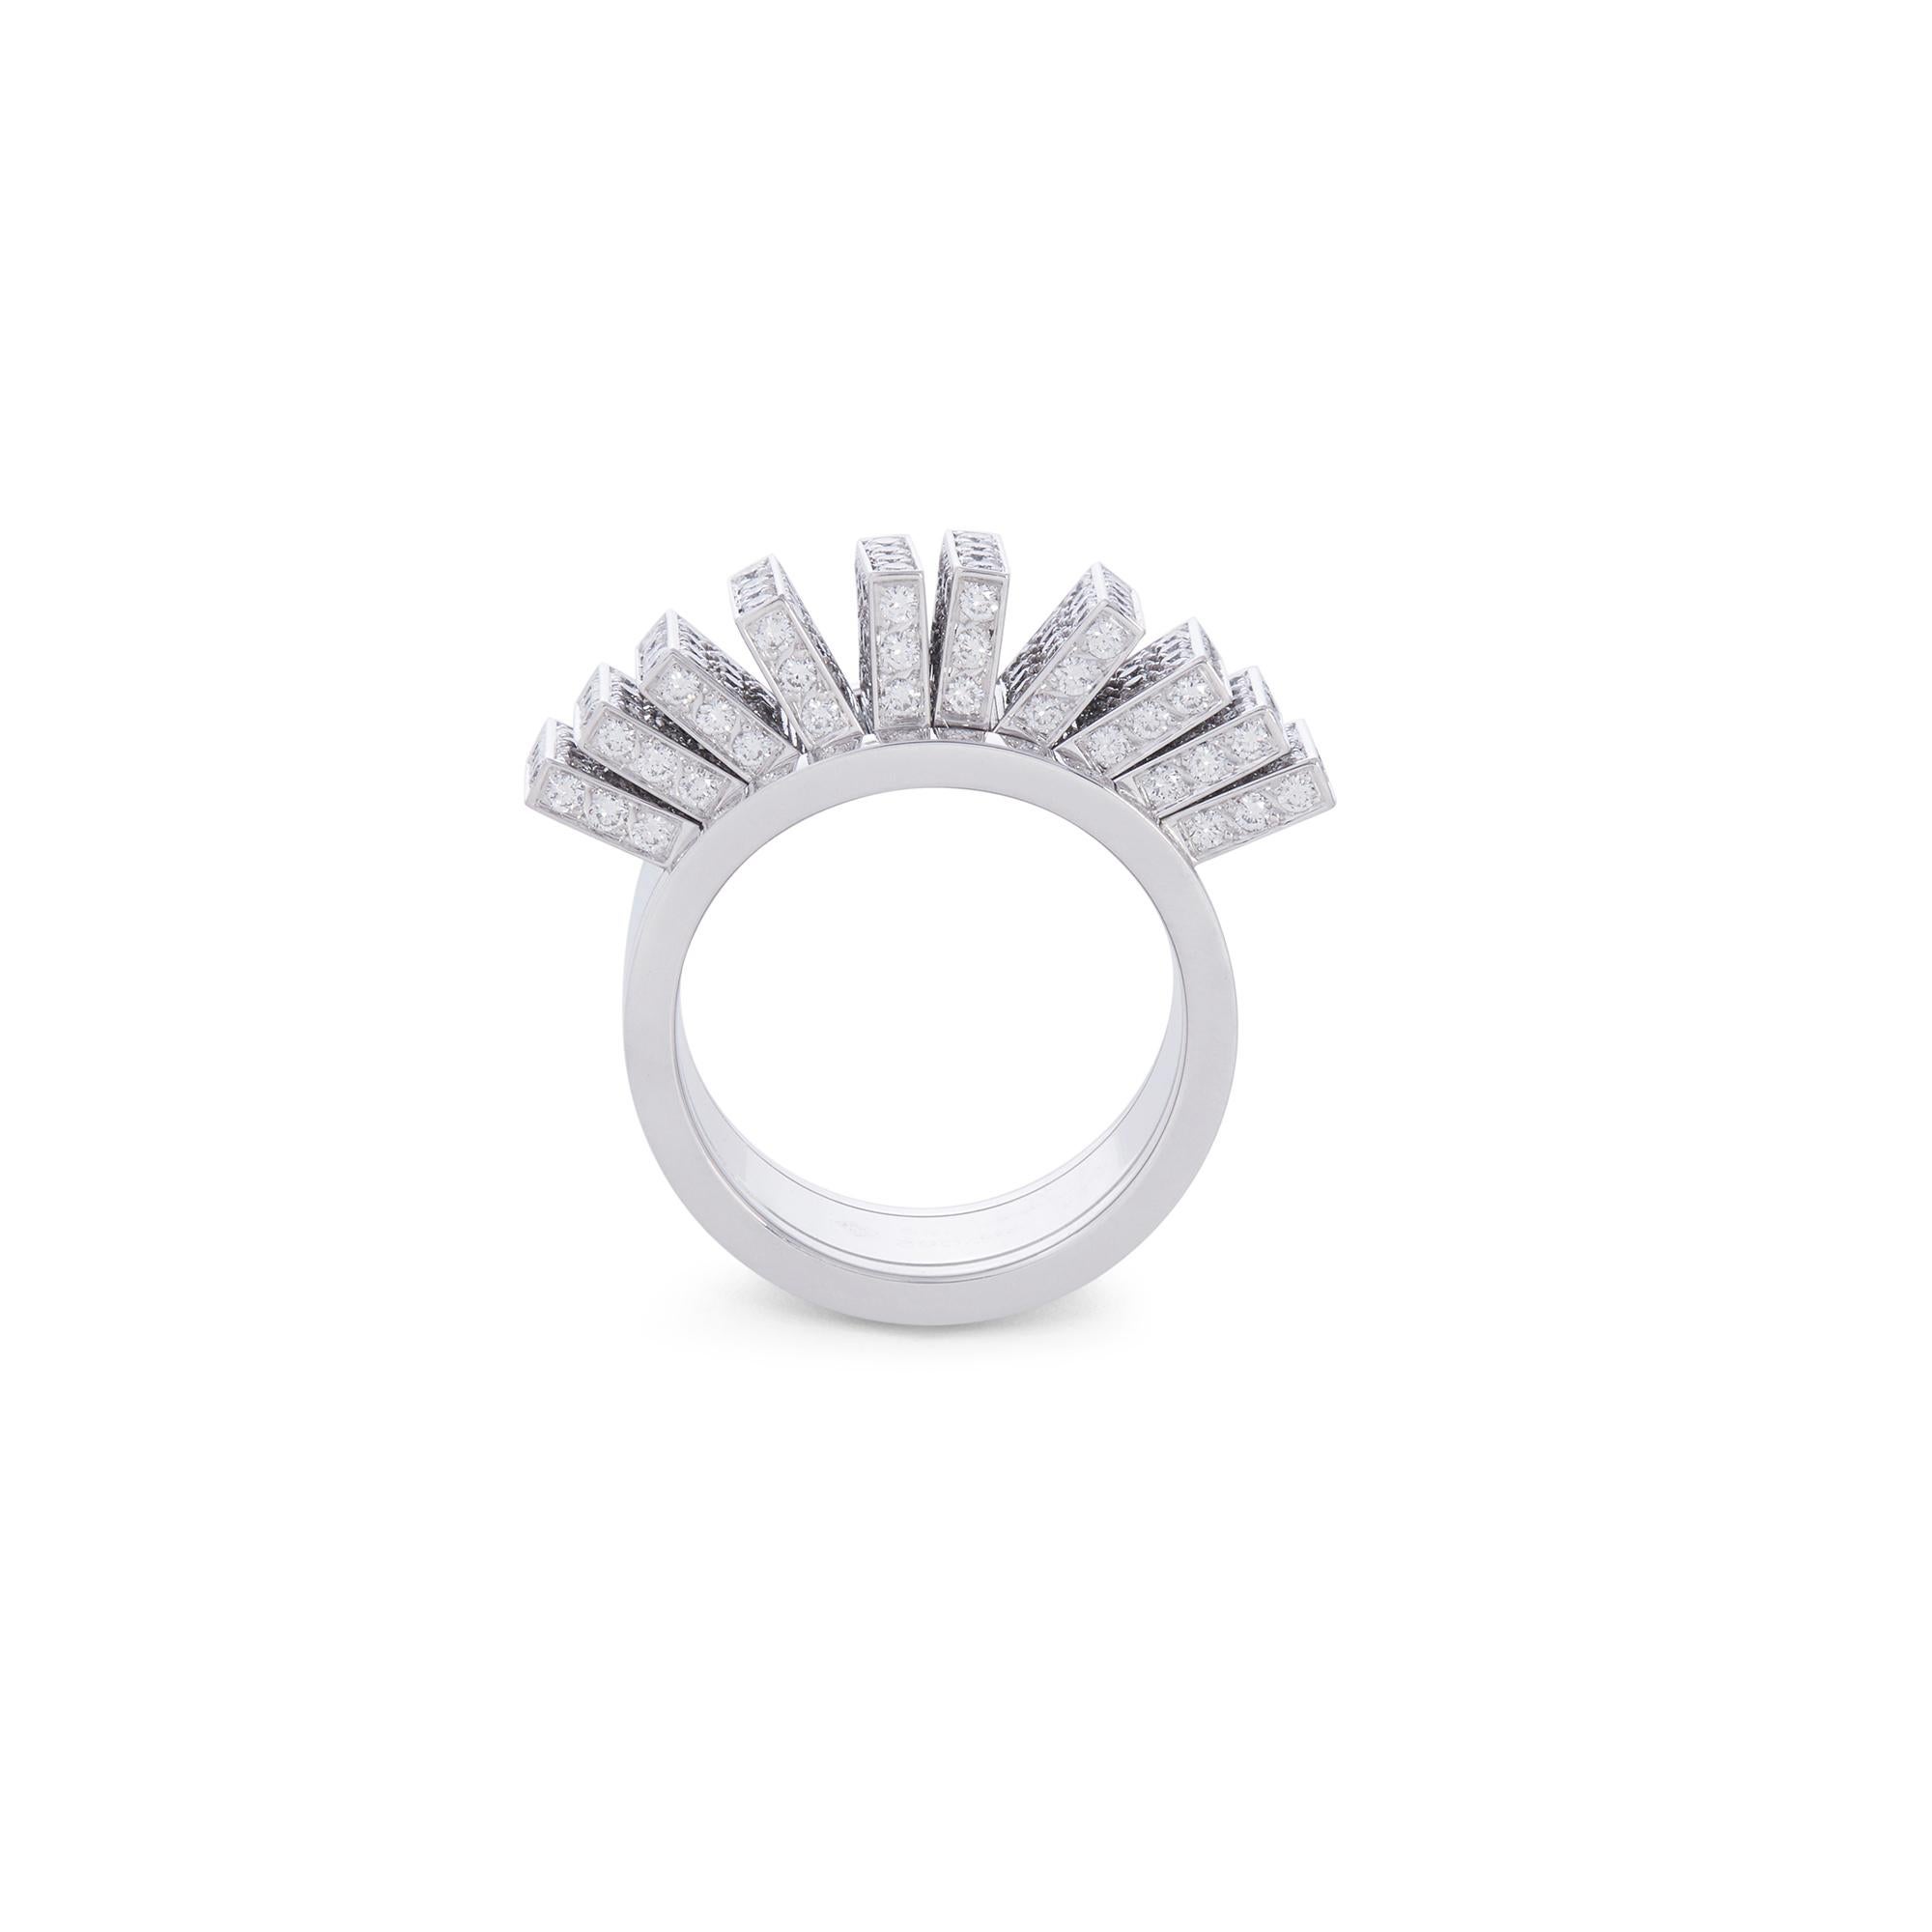 Authentic Cartier Paillettes ring crafted in 18k white gold.  Featuring moveable fan-like sections that are encrusted with diamonds of approximately 3.40 carats total weight.  The band measures 10.7 mm wide.  Size 55, US 7 1/4.  Signed Cartier, 55,